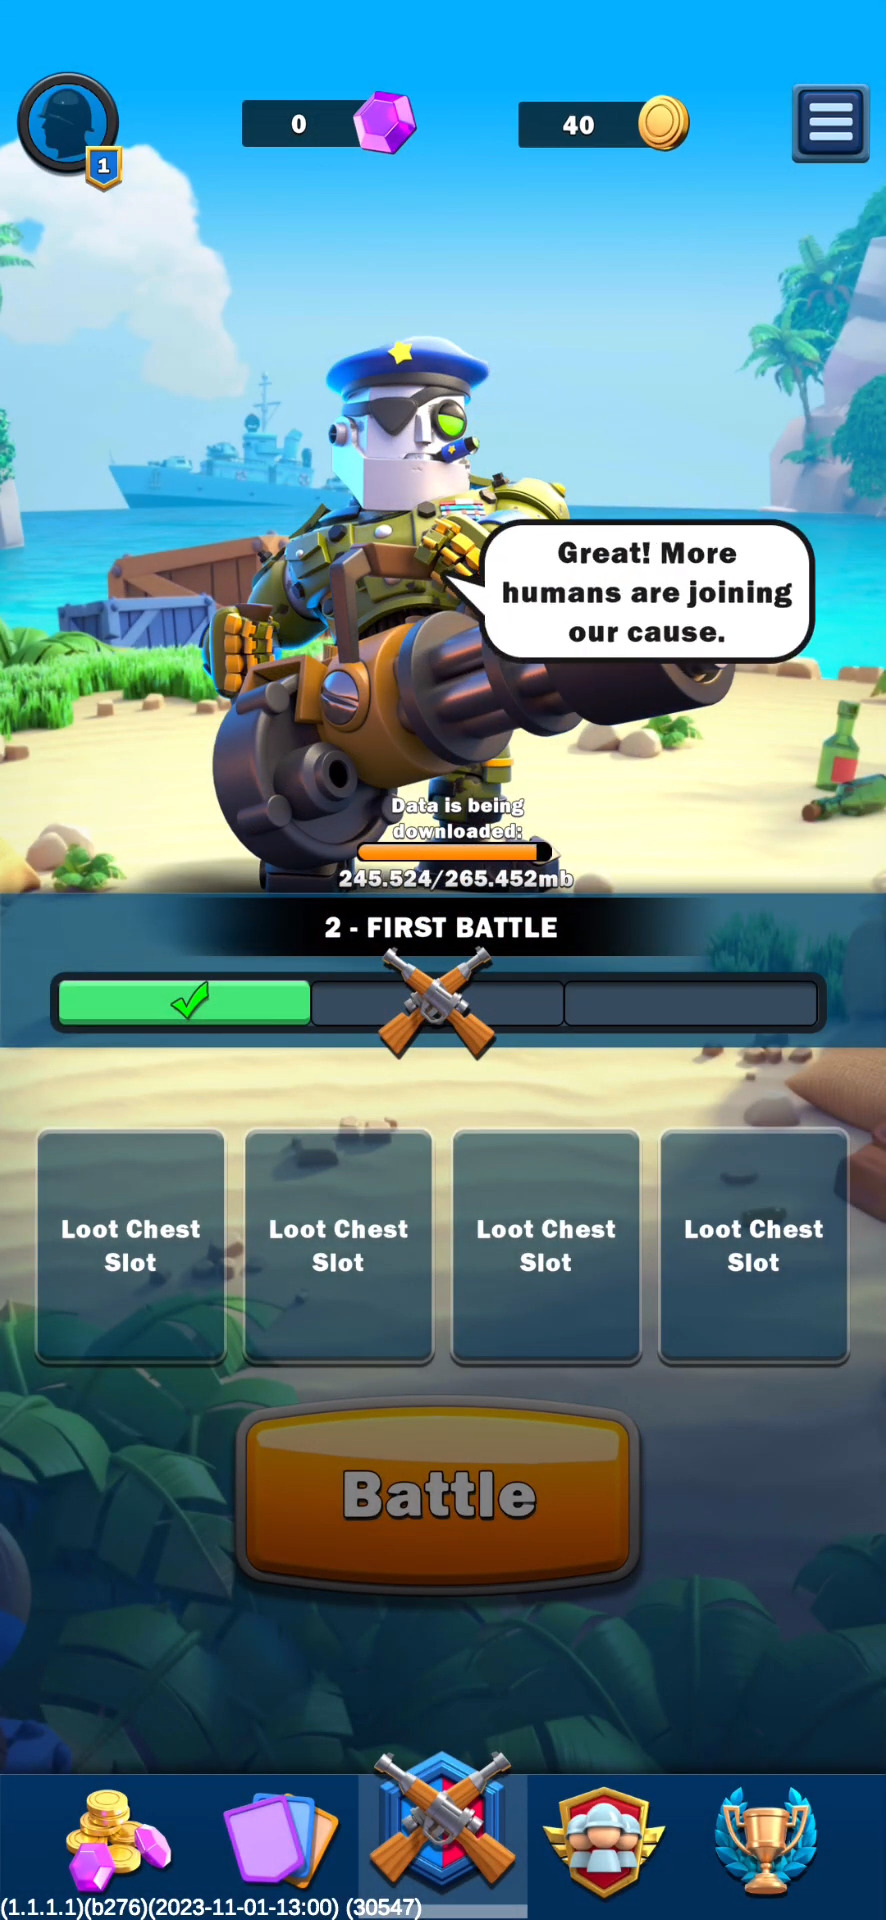 Full version of Android PvP game apk Rebel Bots: Epic War PvP RTS for tablet and phone.